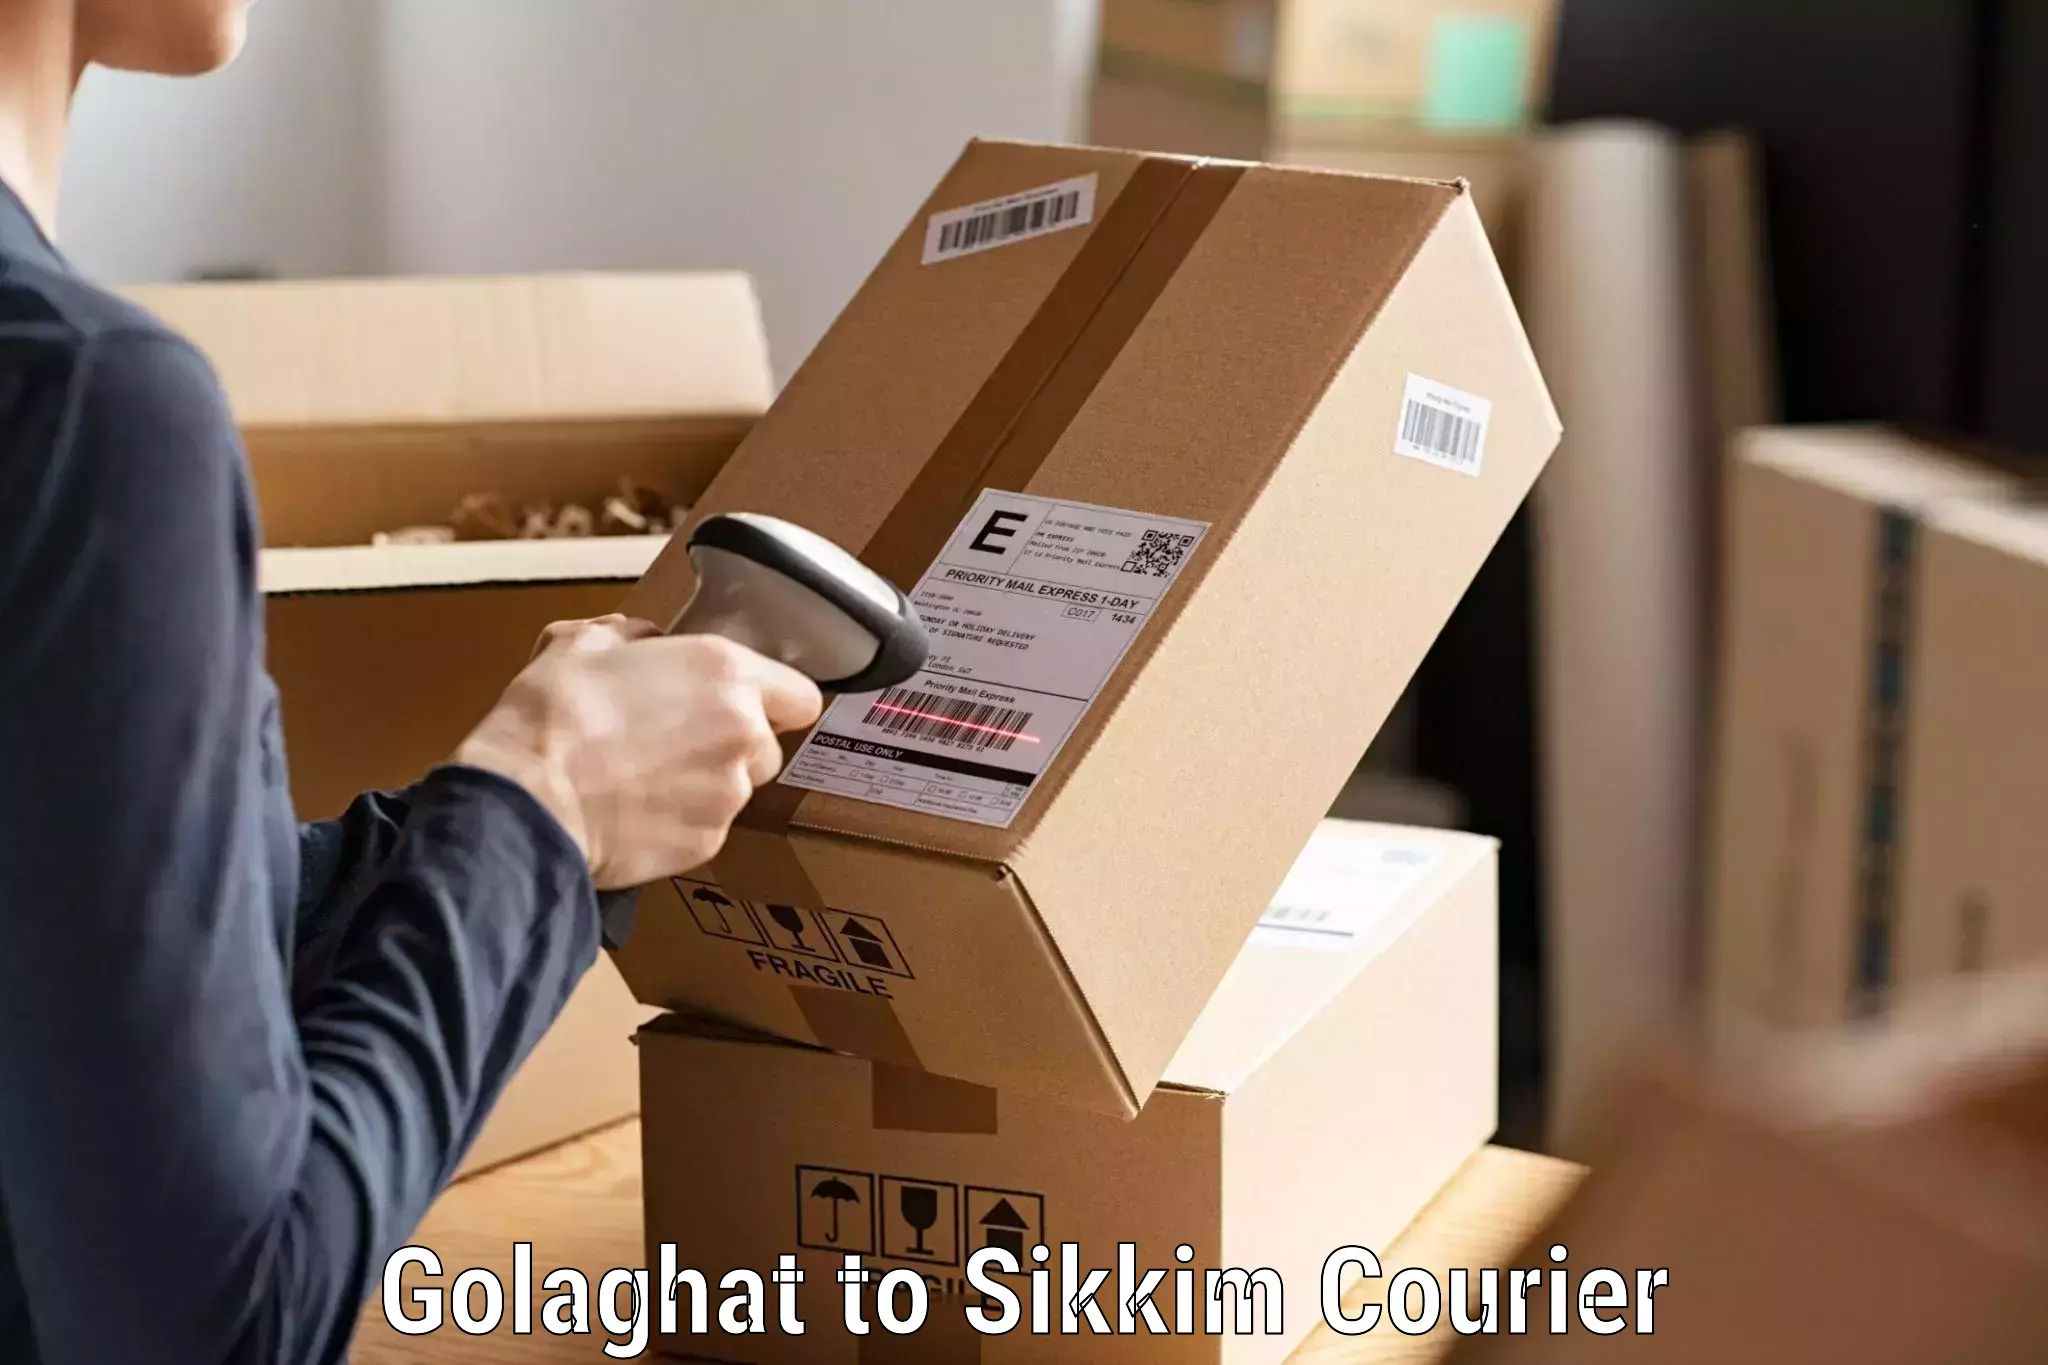 Flexible delivery scheduling Golaghat to Gangtok